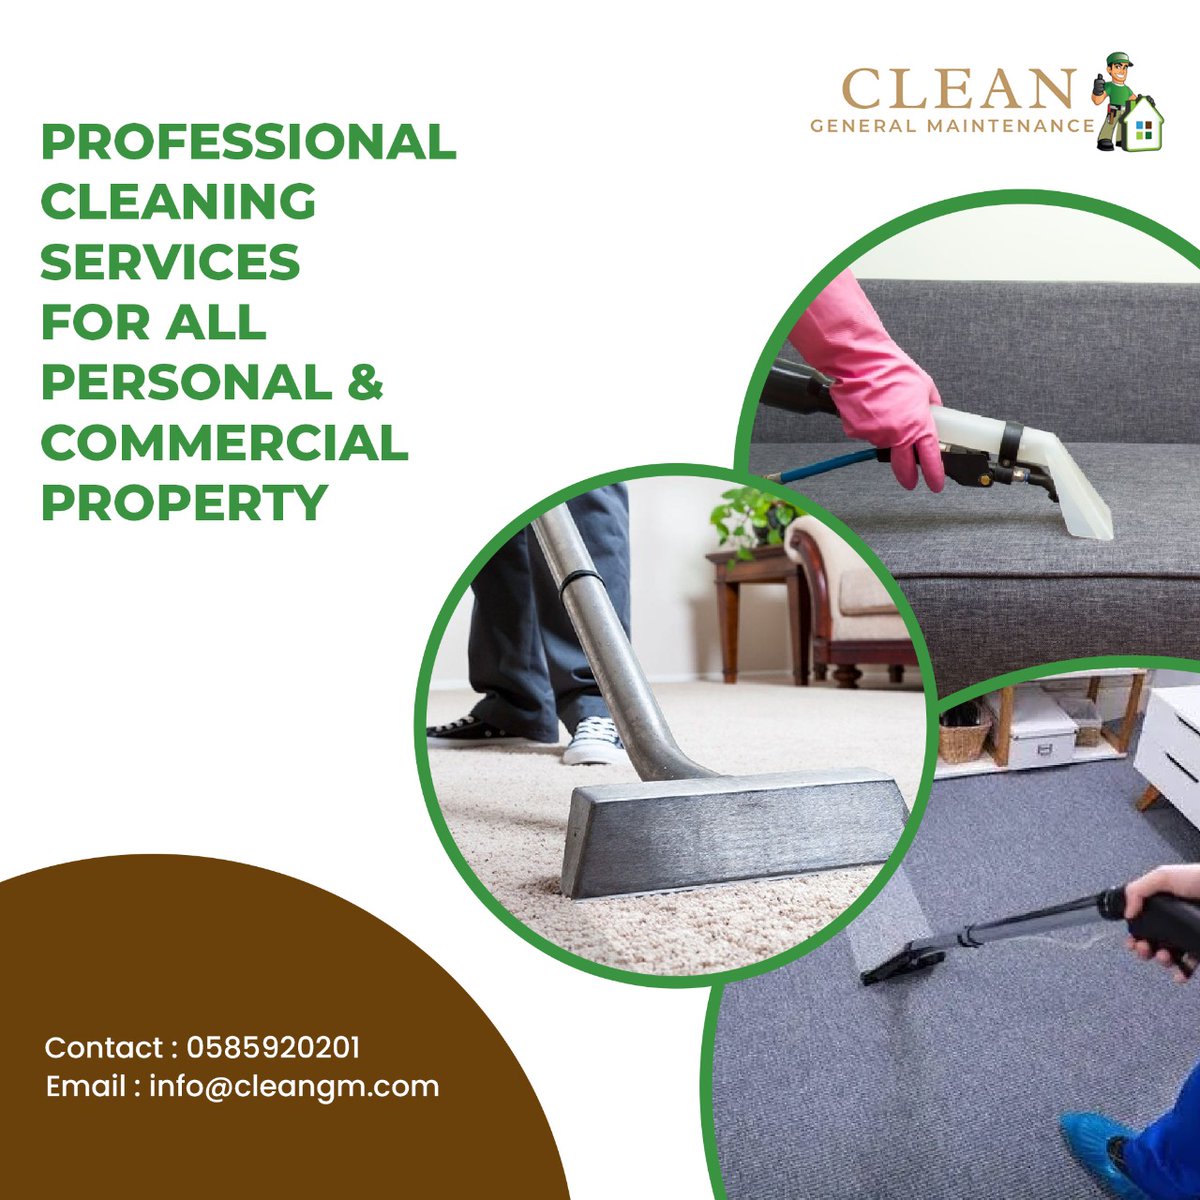 We offer cleaning services for each region of the personal and commercial properties using specialist cleaning tools and supplies.
#ACductcleaning #accleaningdubai  #deepcleaningservices #cleaningservicesdubai #cleaningservicessharjah #carpetcleaningdubai #sofacleaningdubai